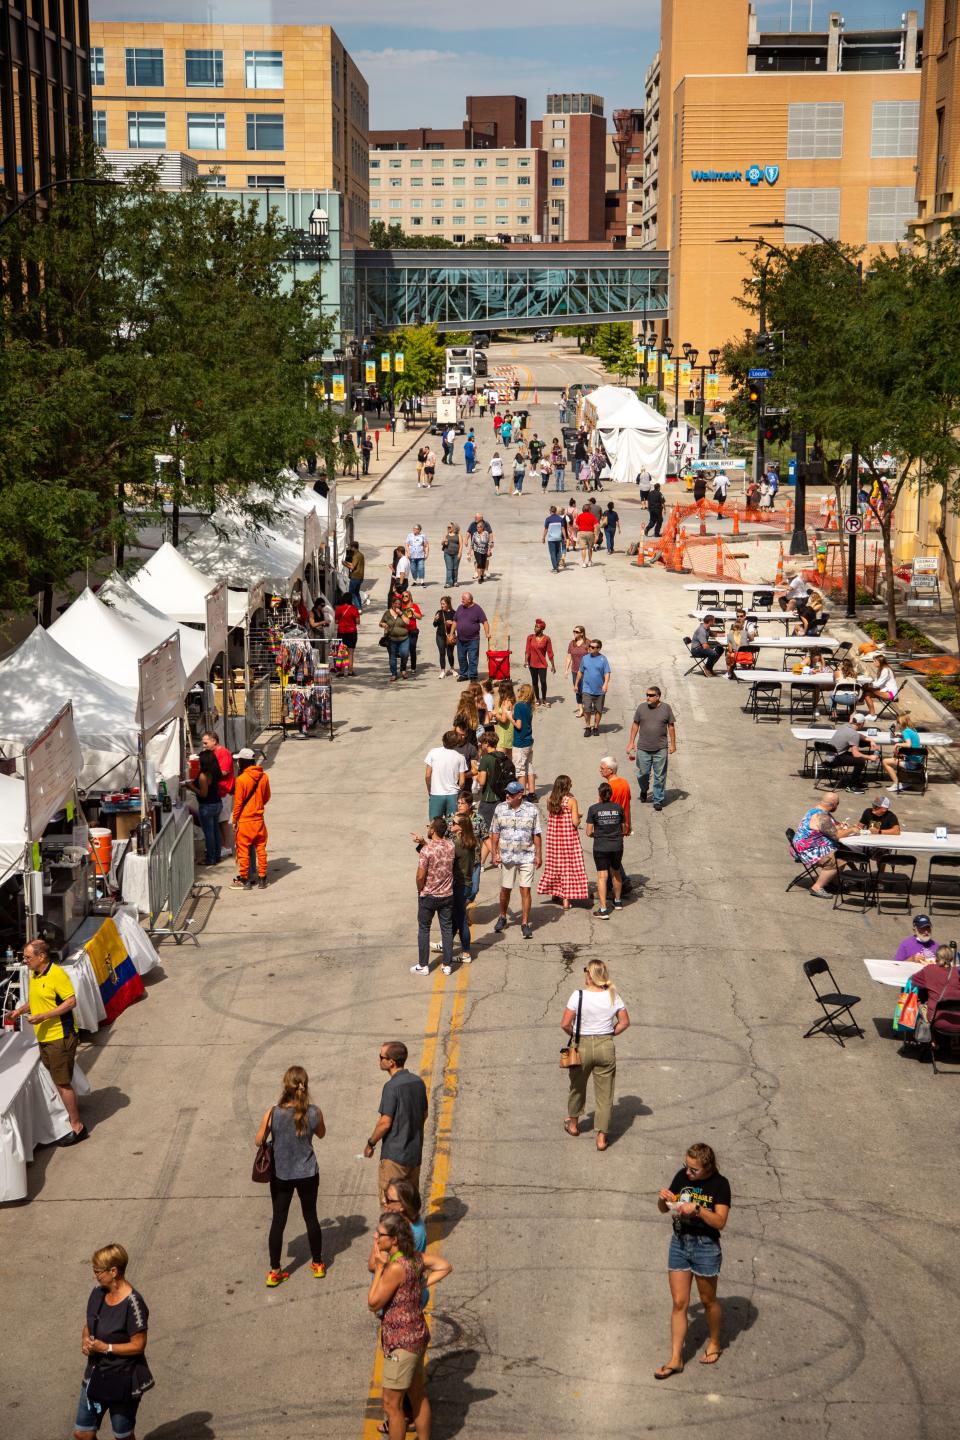 The World Food & Music Festival took over the Western Gateway Park in Des Moines in 2021.